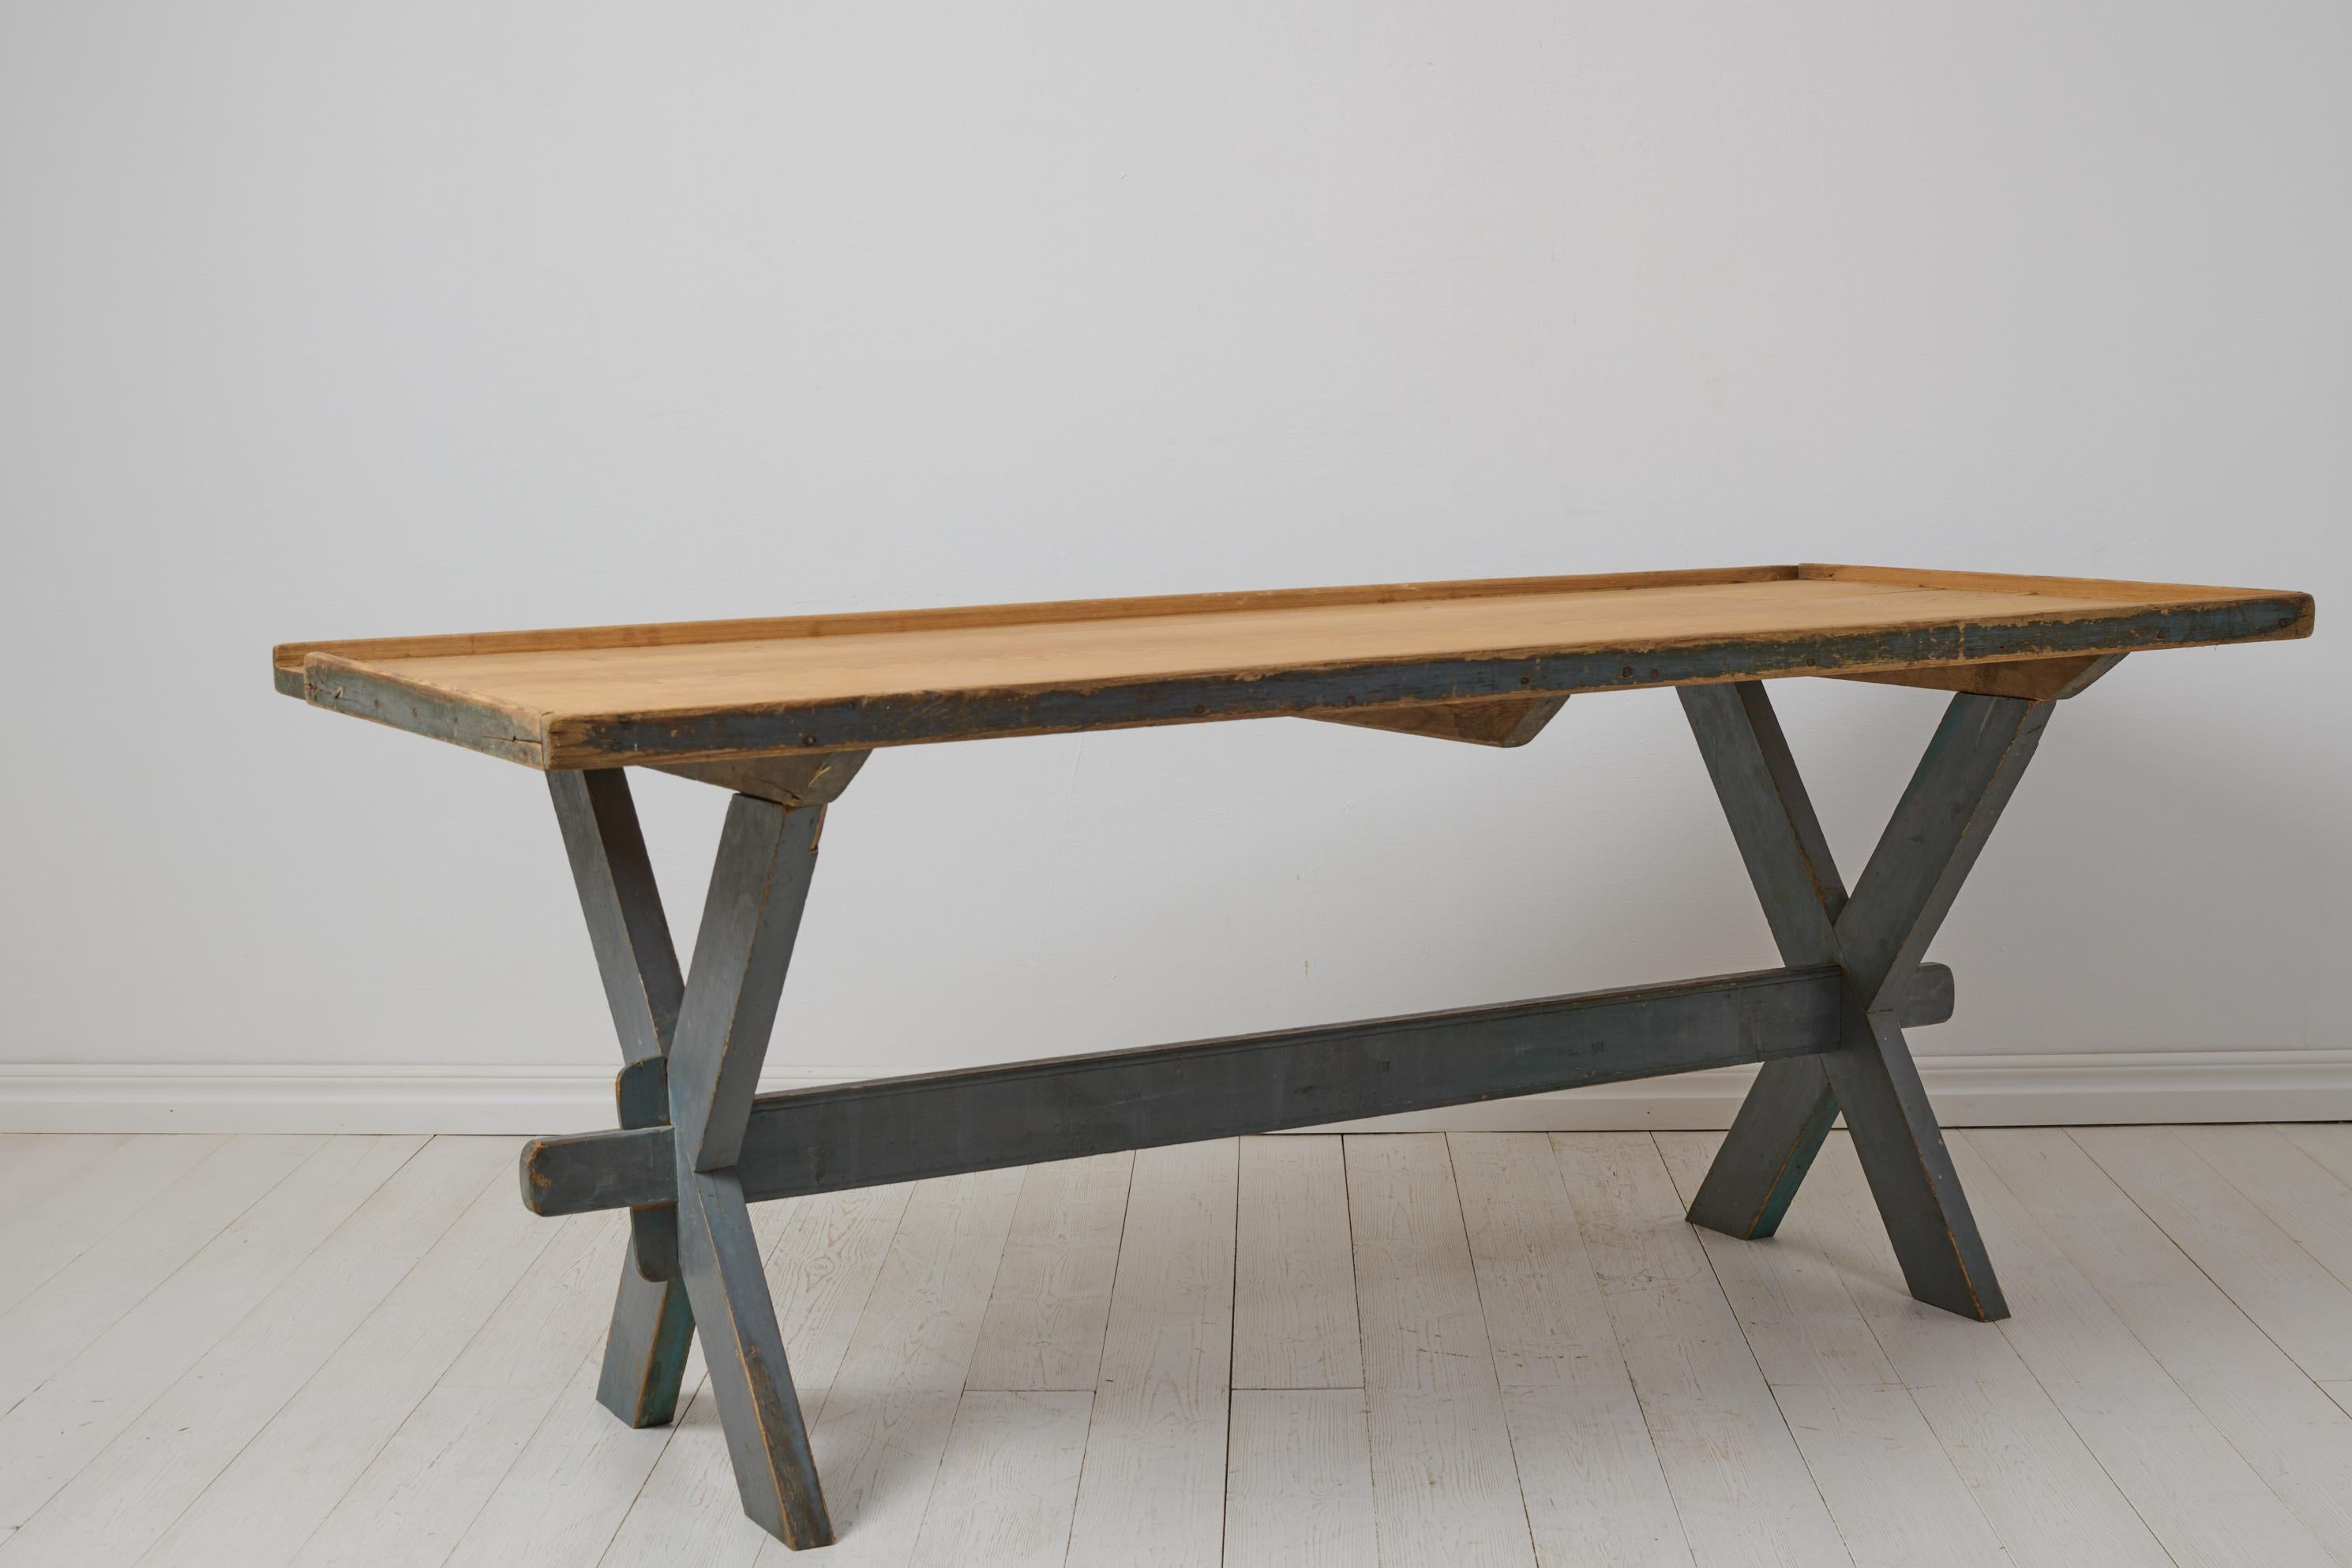 Antique dining or work table from northern Sweden. The table is a genuine Swedish country house furniture from the 1840s to 1850s. The table is a trestle table with a solid table top on a leg frame. Good height and measurements for a dining table